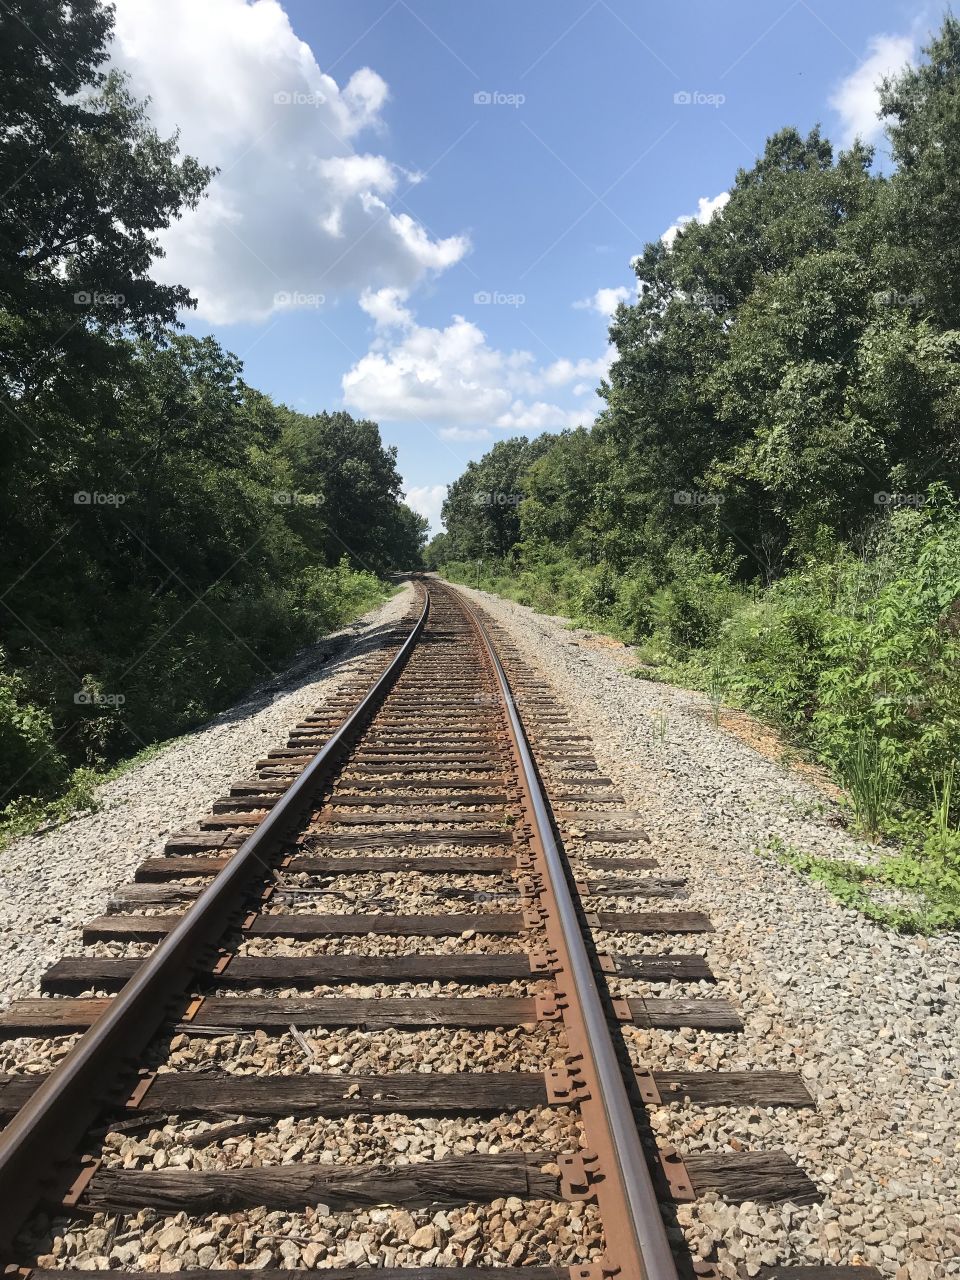 Down the tracks